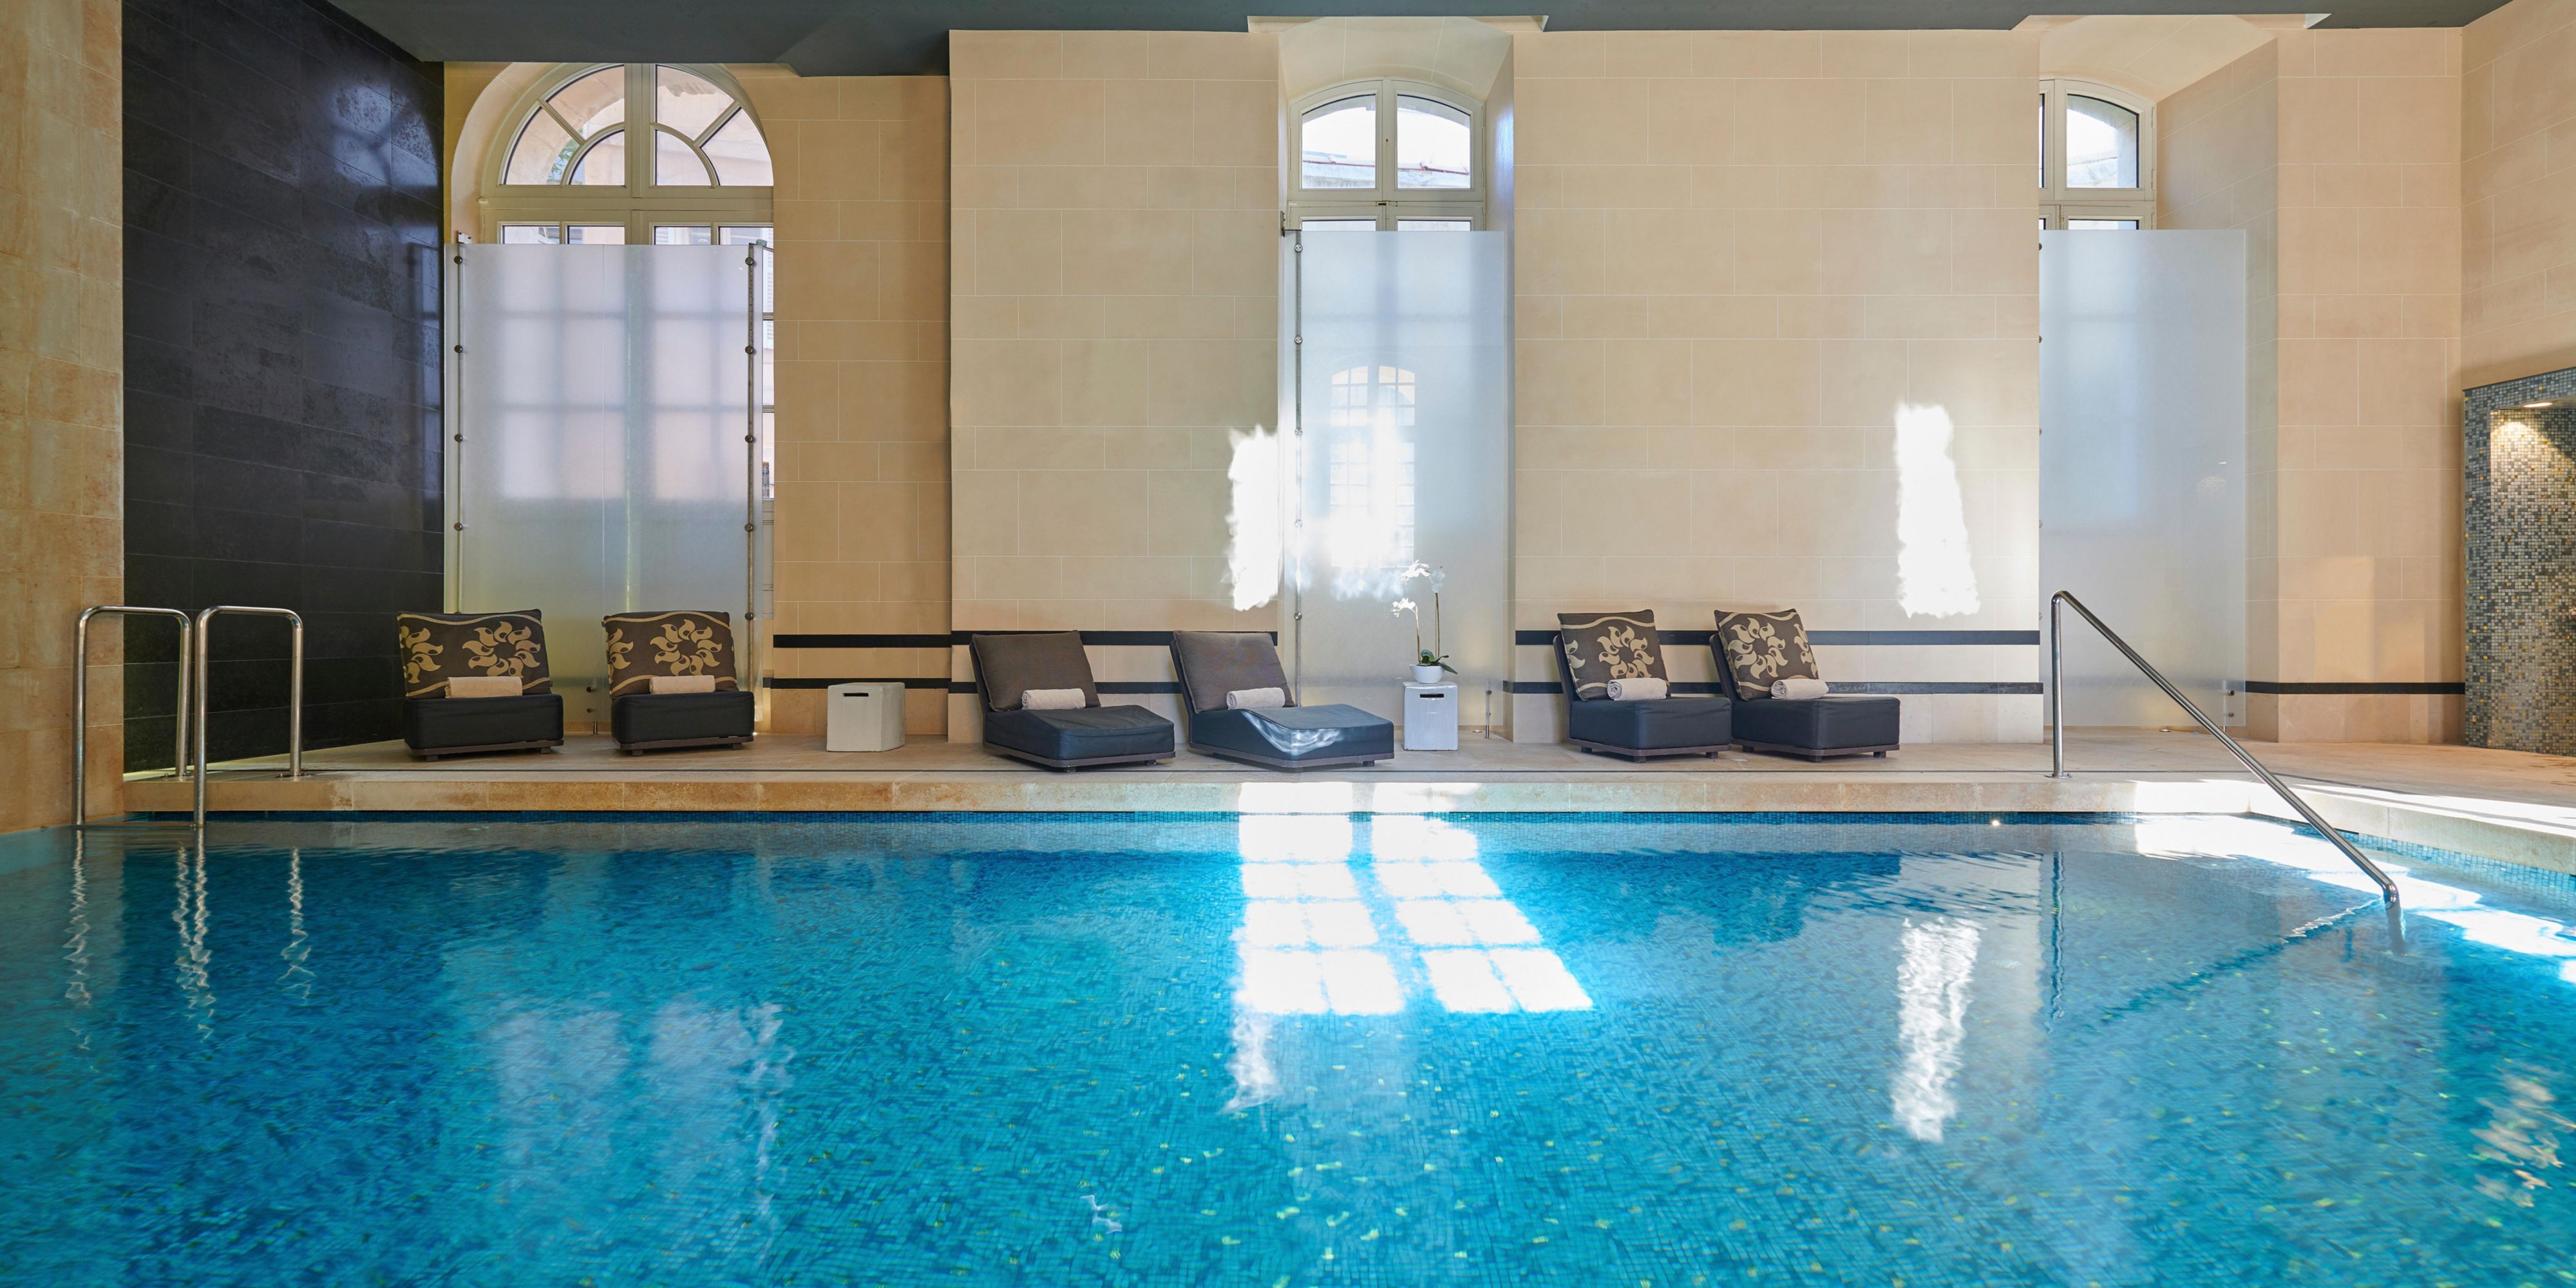 Inspired by the traditional Provencal fountains and lavoirs (communal clothes’ washing places), the SPA by Clarins offers time out from everyday life. Experience a moment of sheer revitalizing relaxation in an ambience redolent of the warmth and sensuality of the Mediterranean basin.